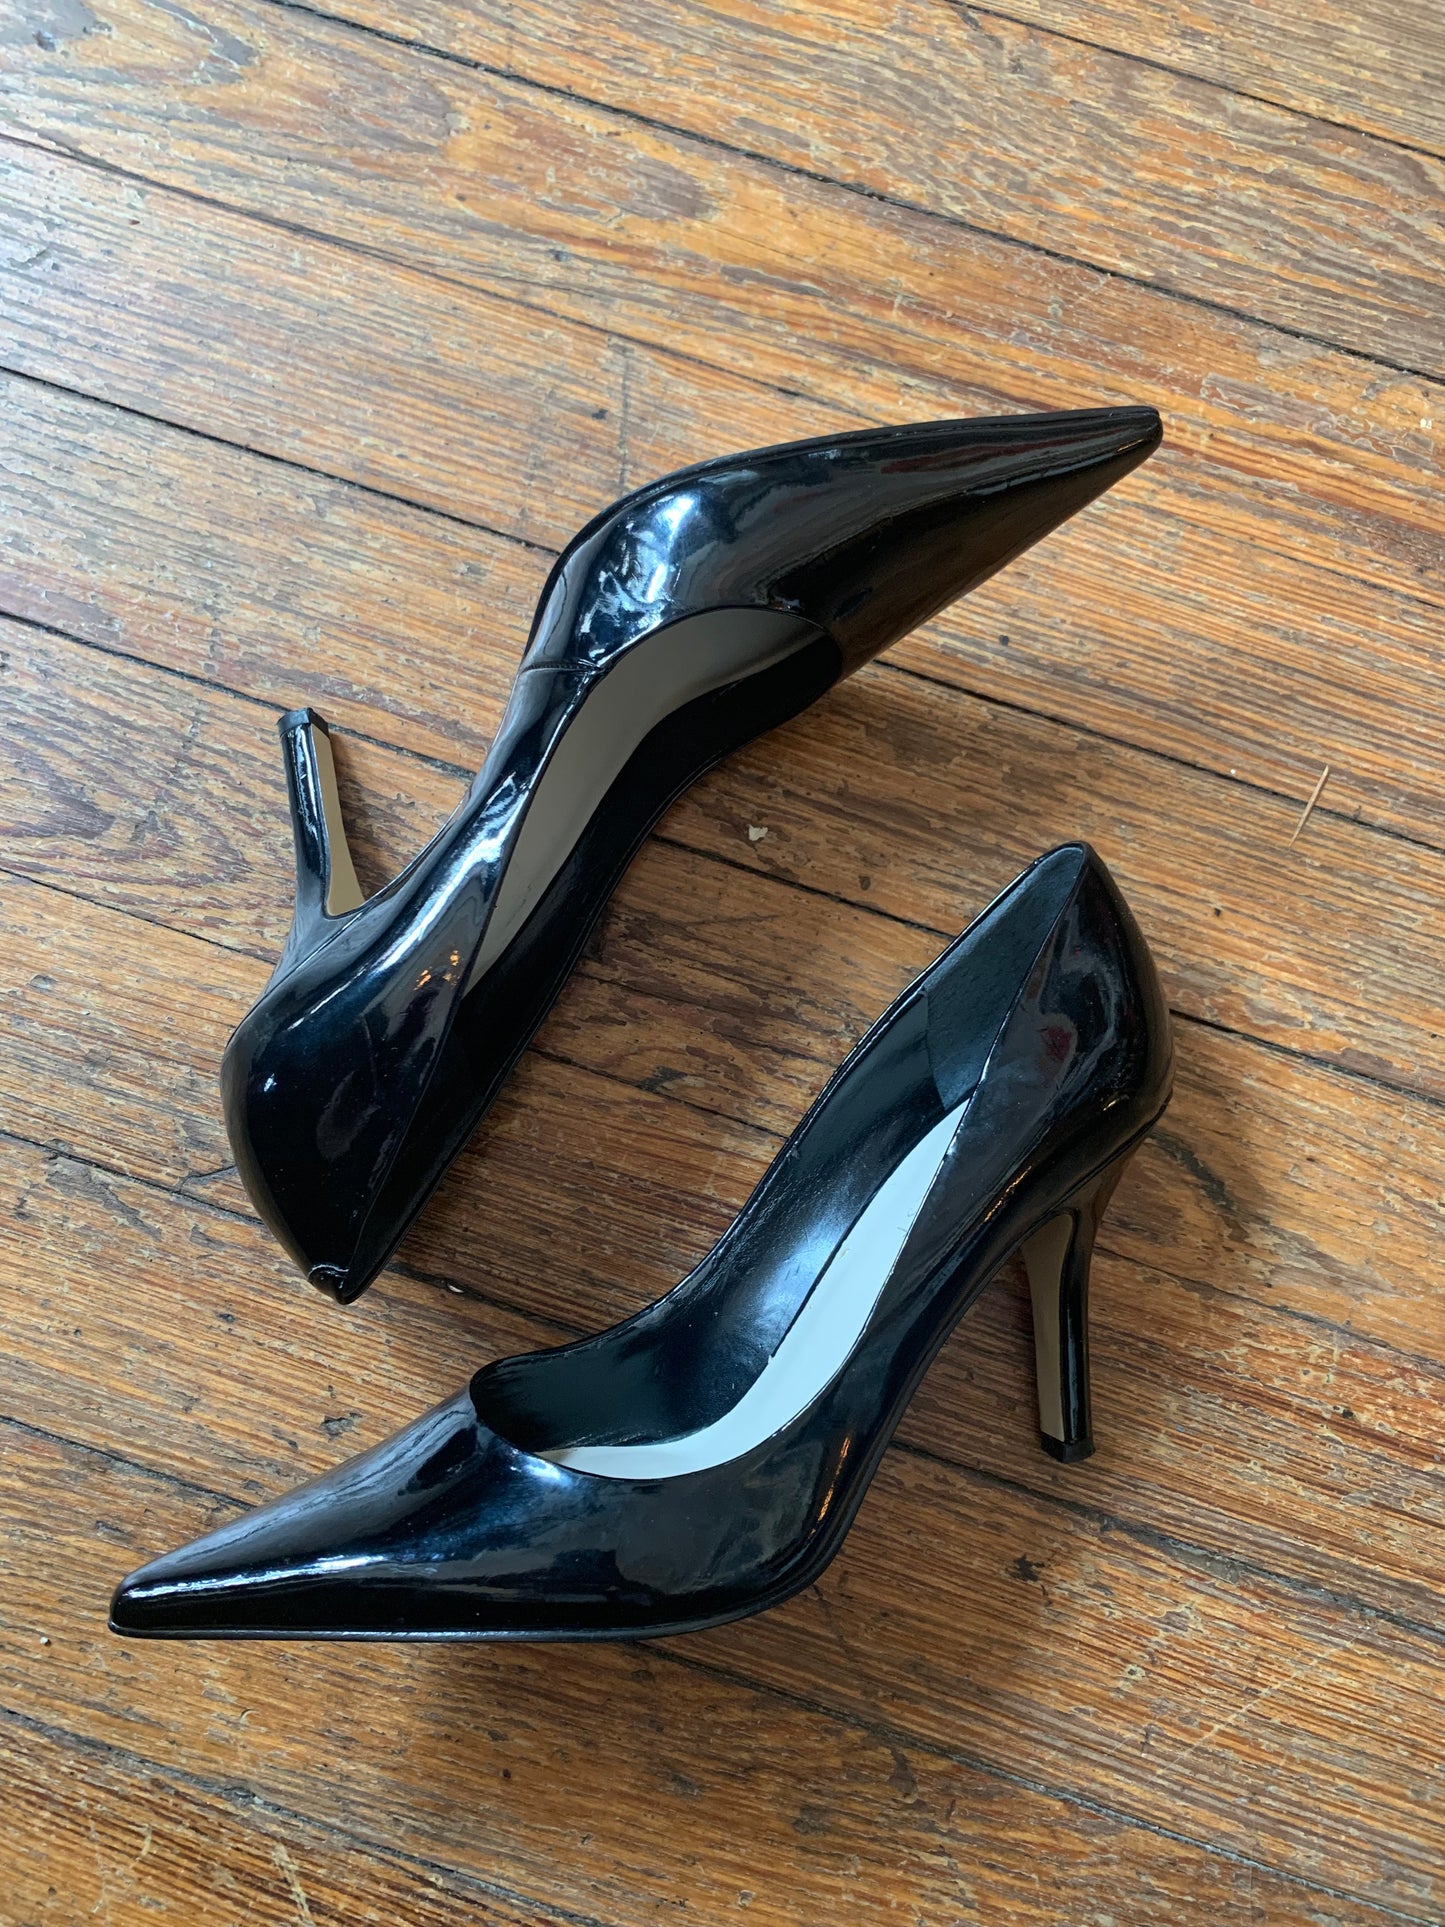 Black Patent Leather Pointed Toe Heels